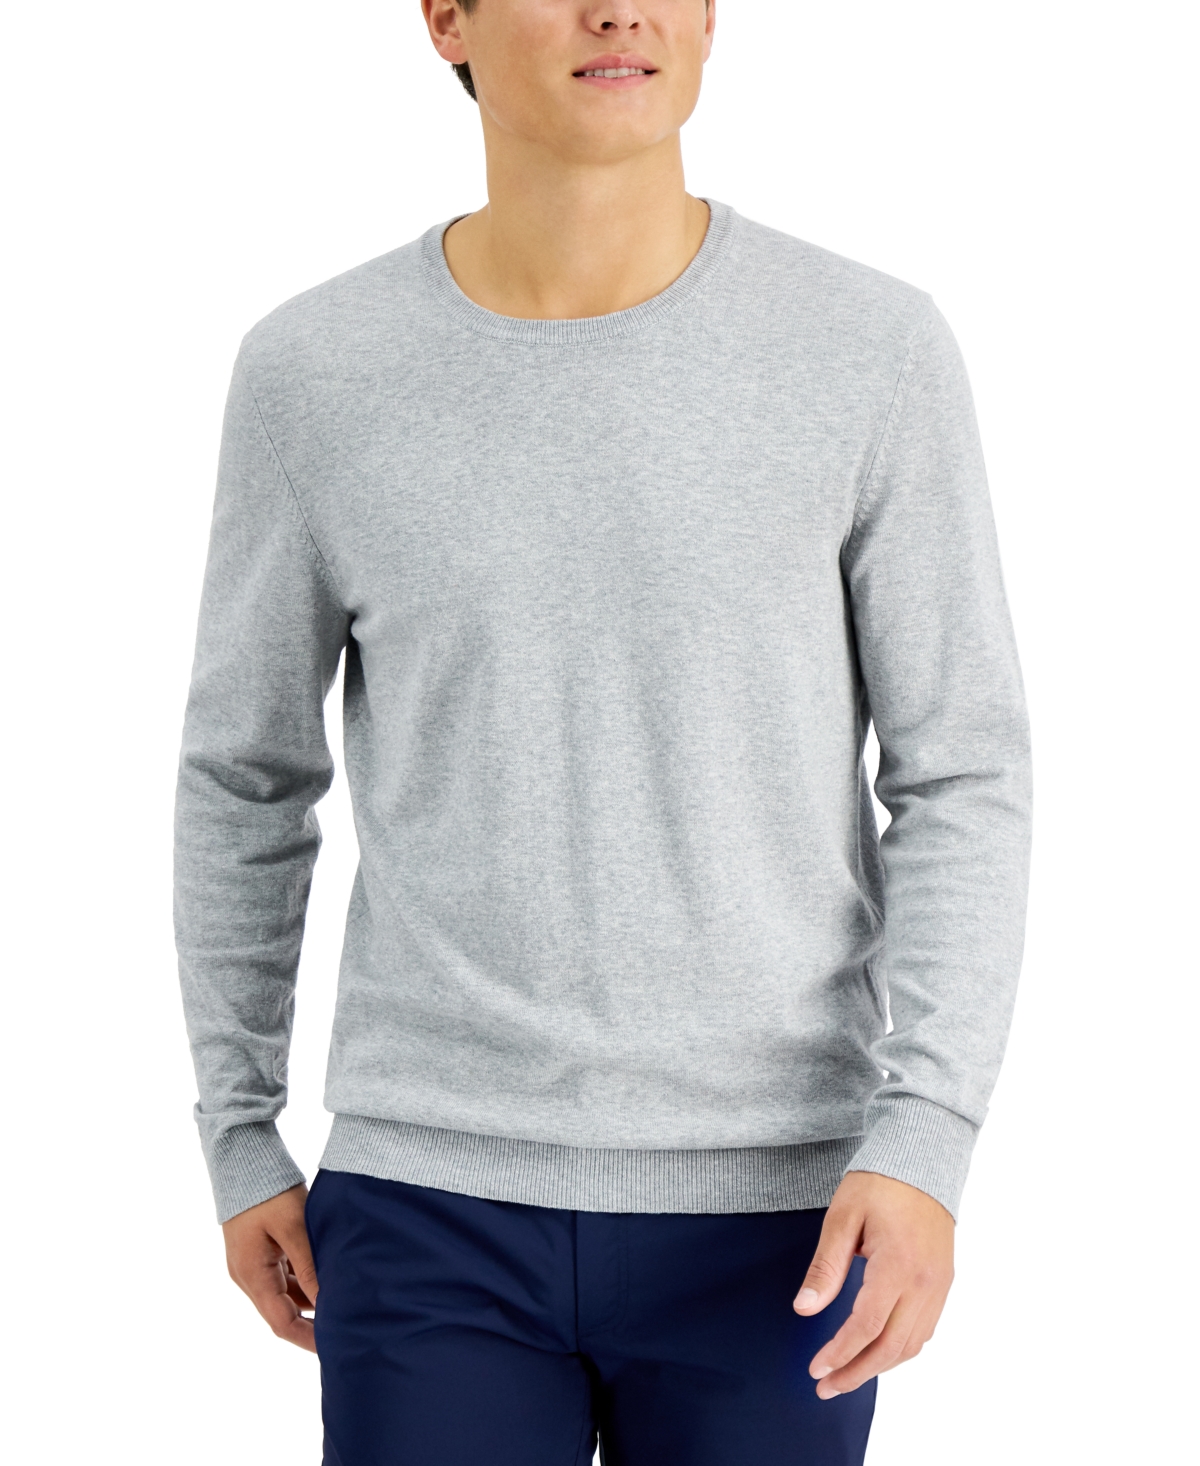 Men's Solid Crewneck Sweater, Created for Macy's - Charcoal Heather